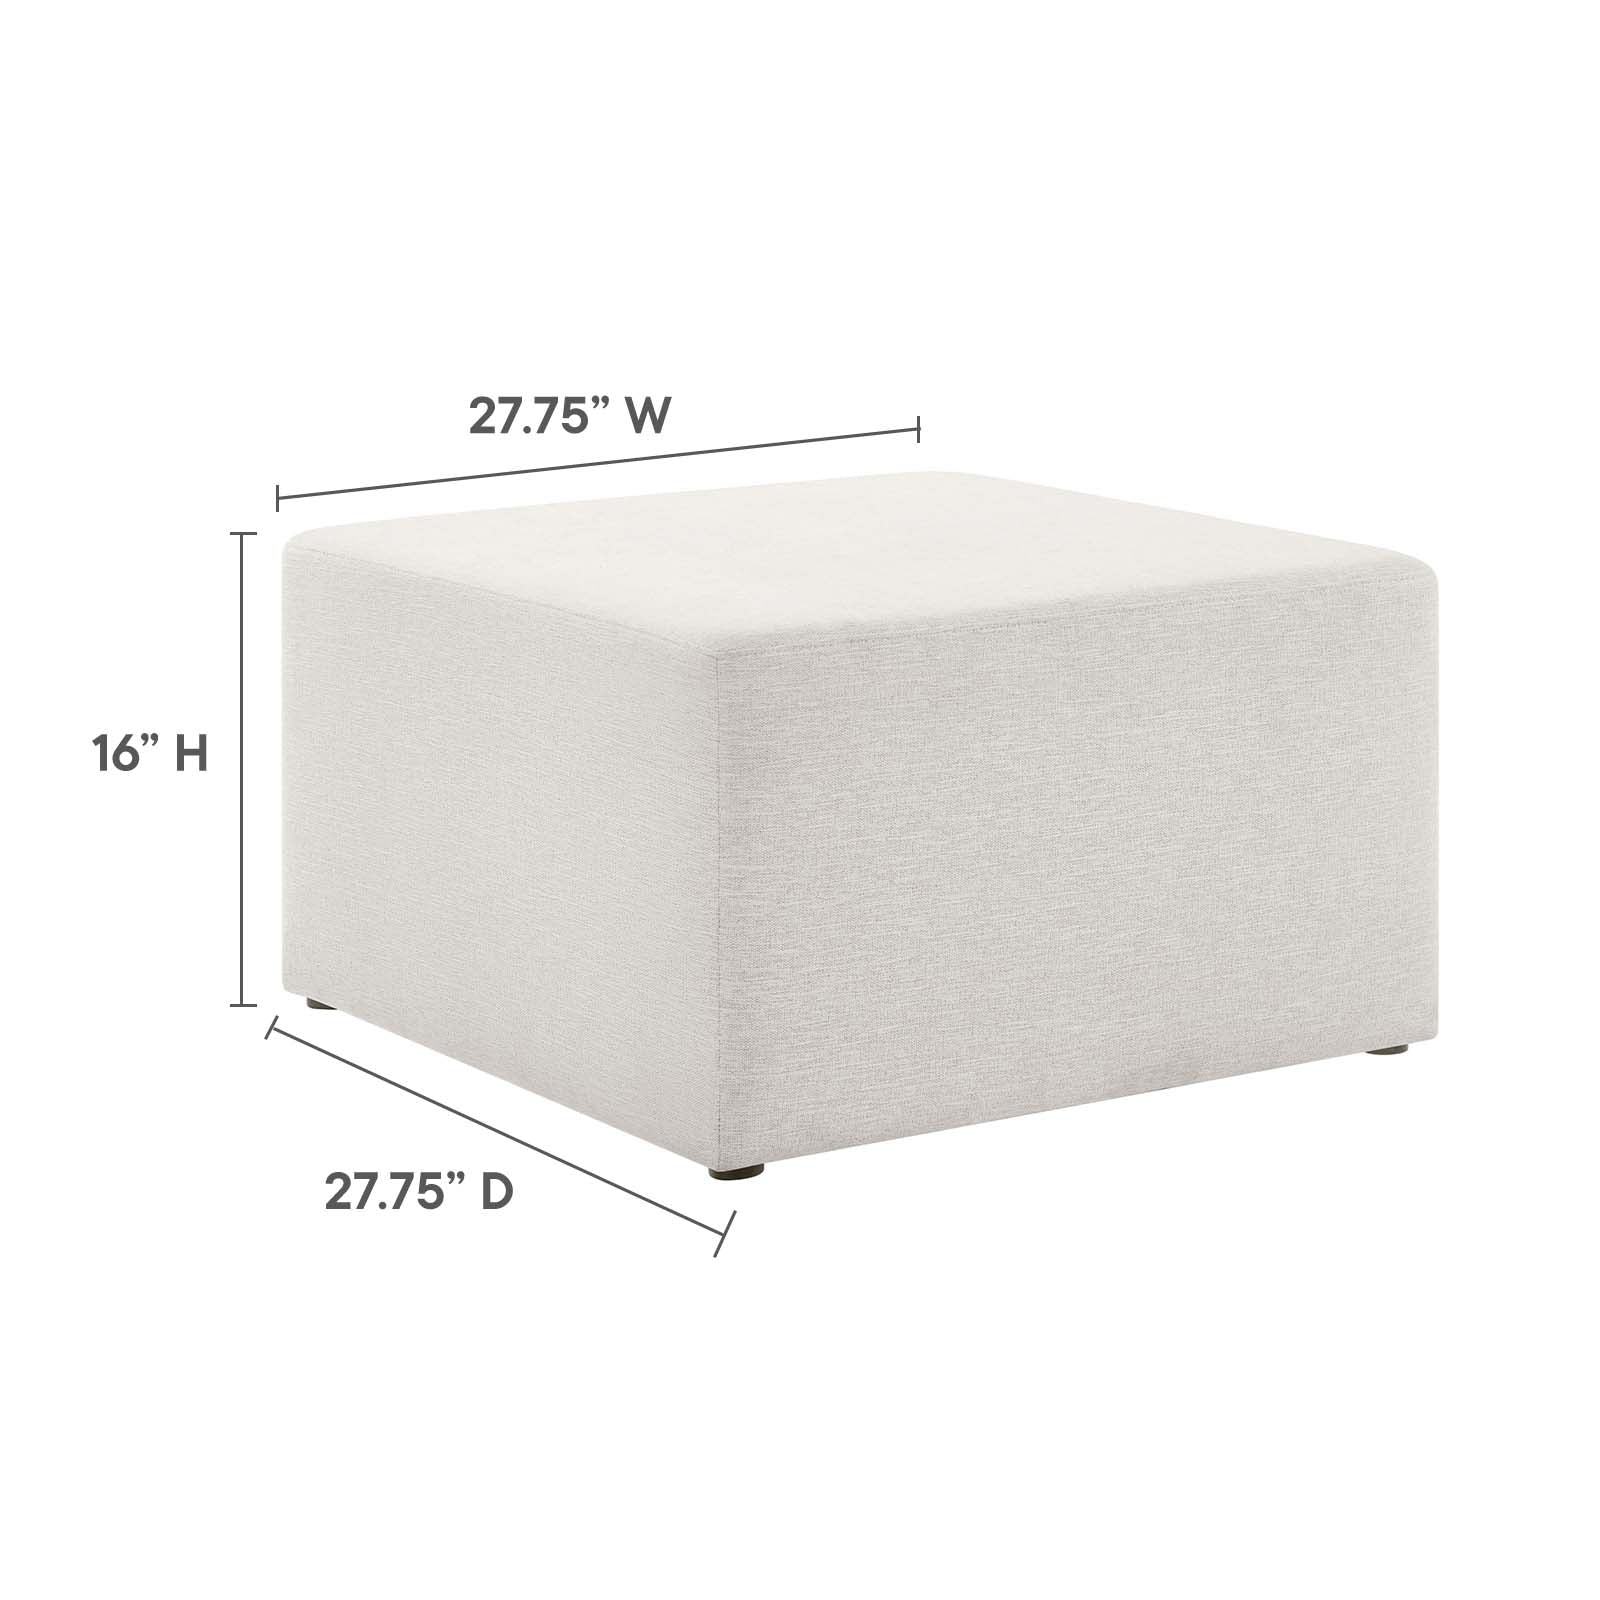 Callum Large 28" Square Woven Heathered Fabric Upholstered Ottoman - East Shore Modern Home Furnishings